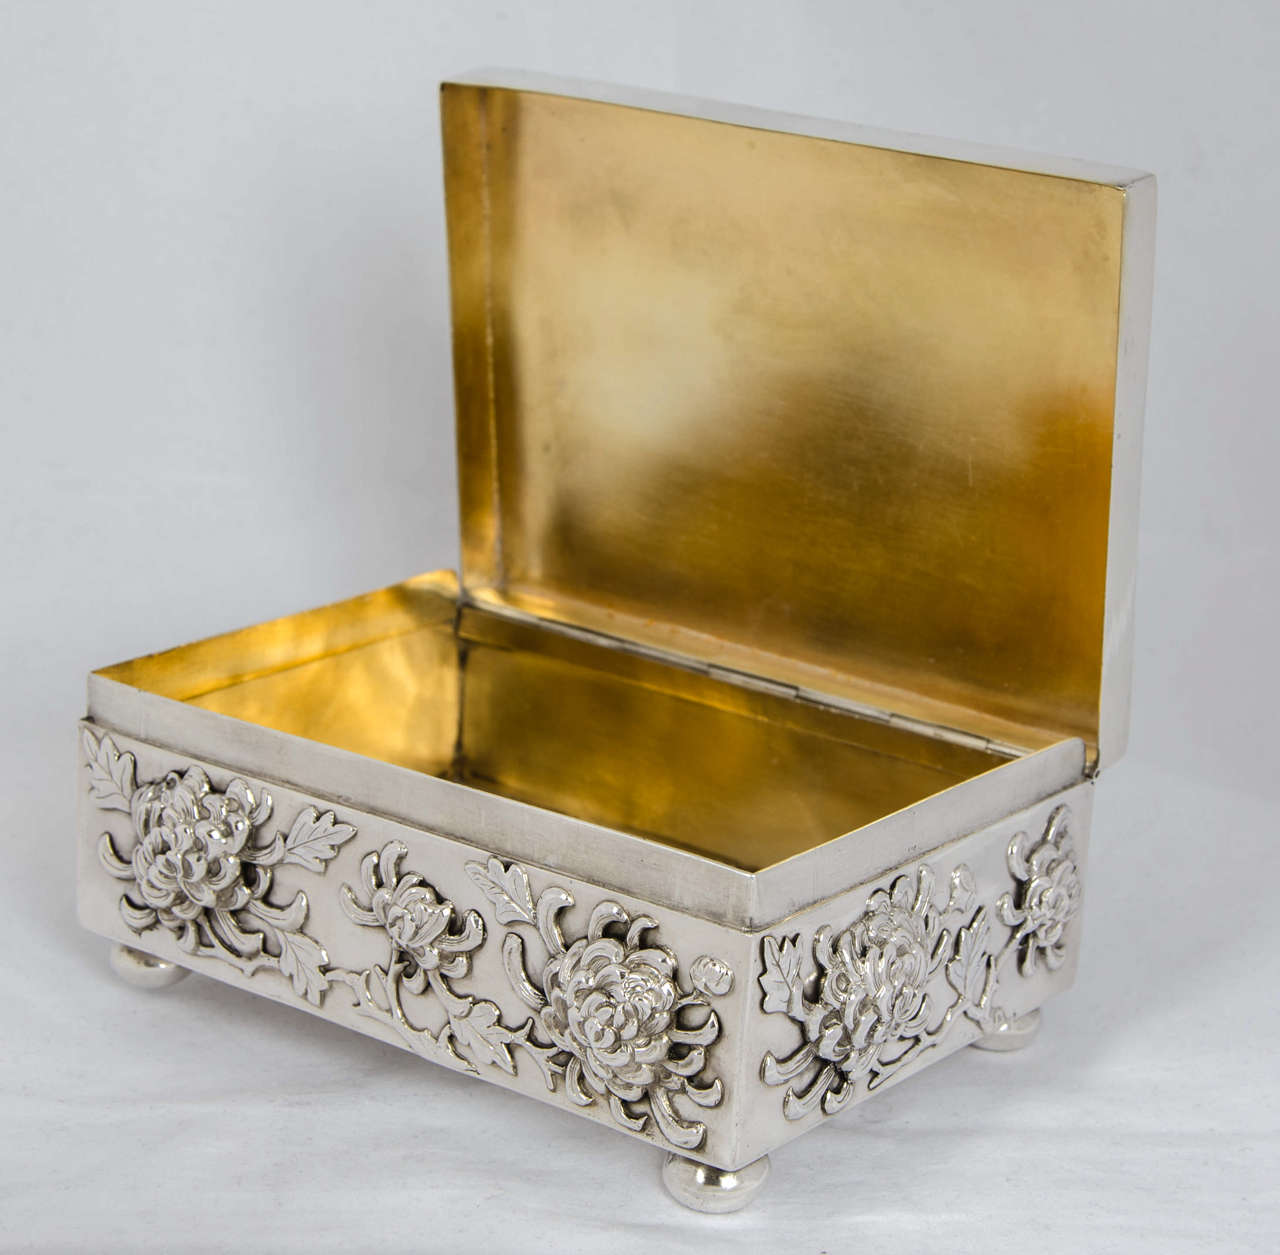 Chinese Export Silver Box with Chrysanthemum 2